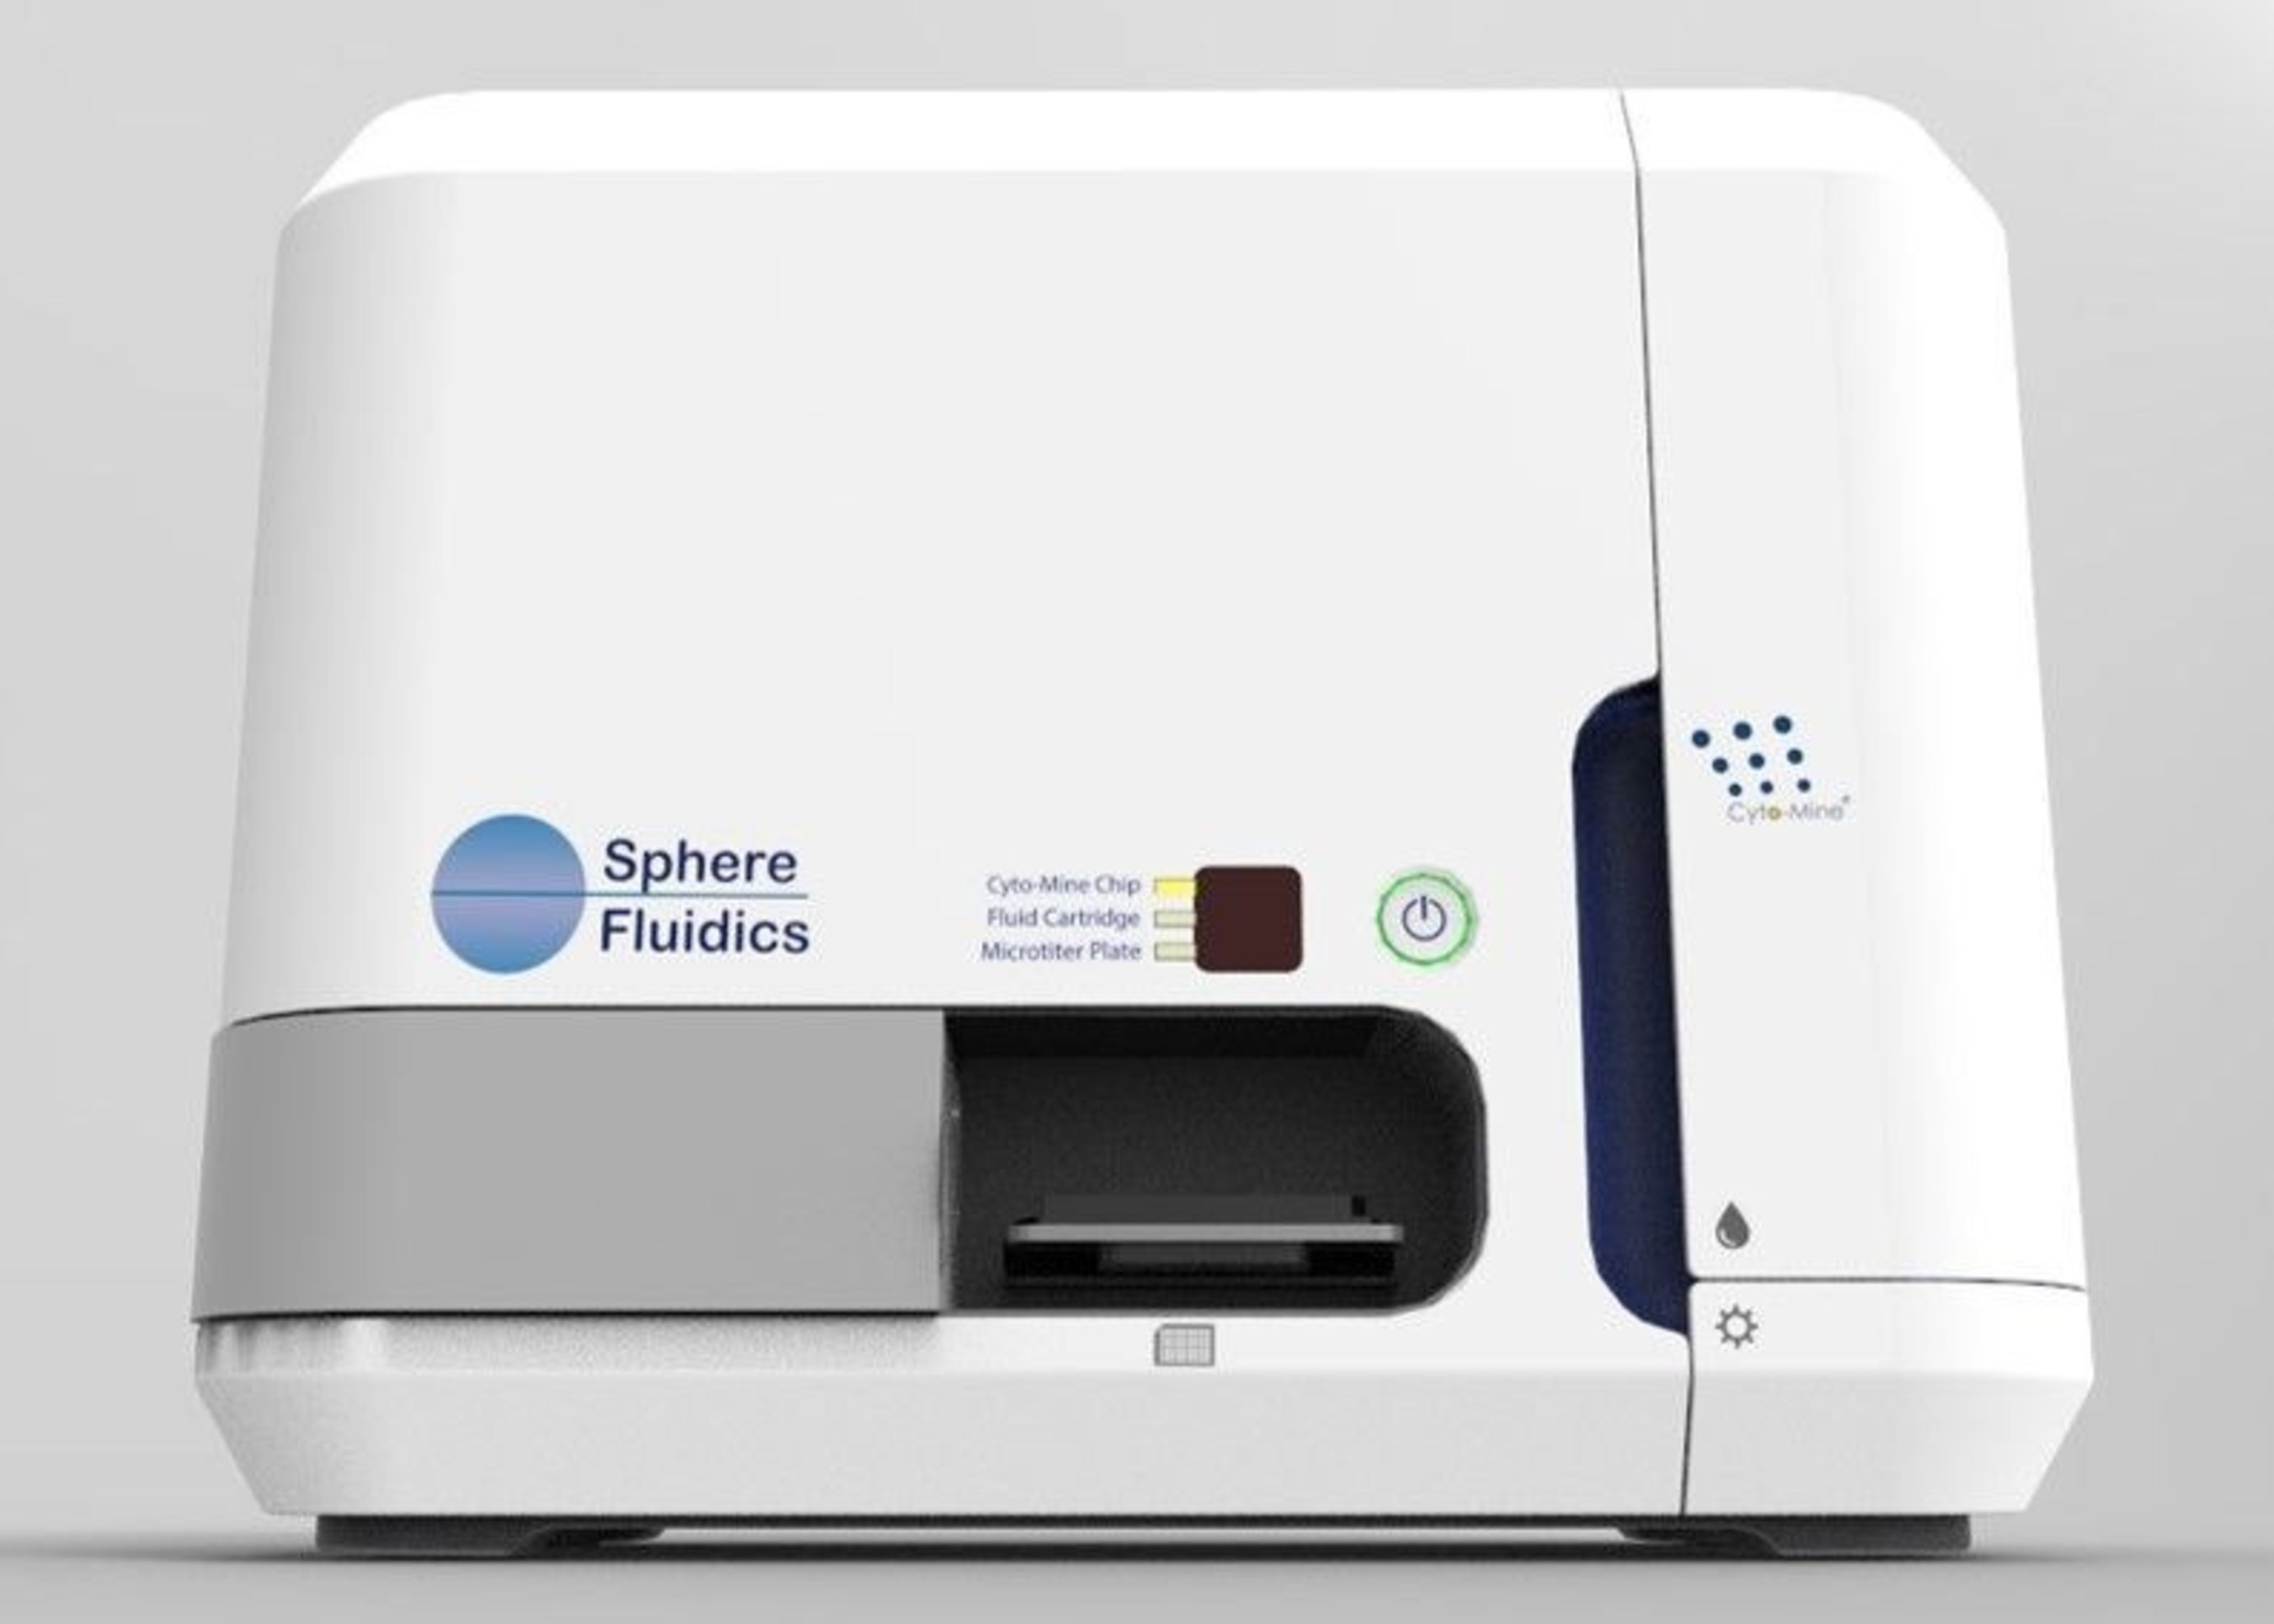 Sphere Fluidics raises $7 M for launch of Cyto-Mine(R) single cell analysis system